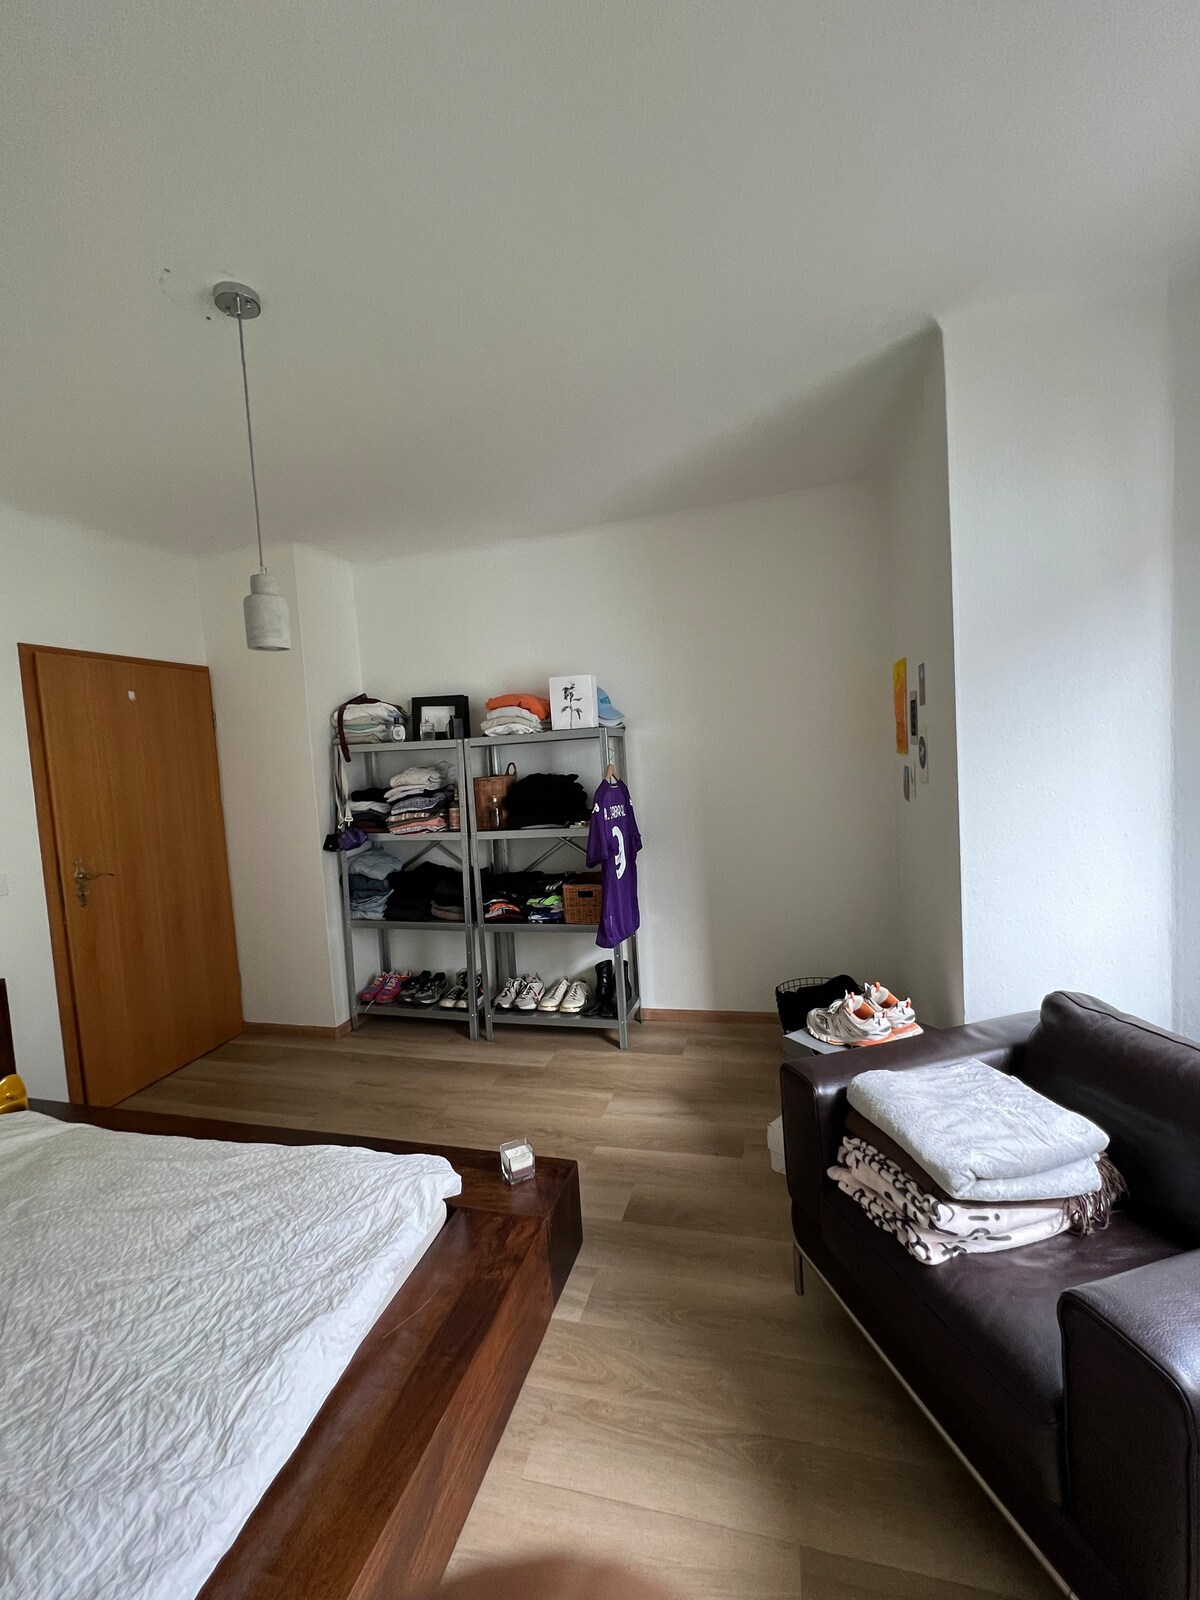 3 Room apartment in Basel.